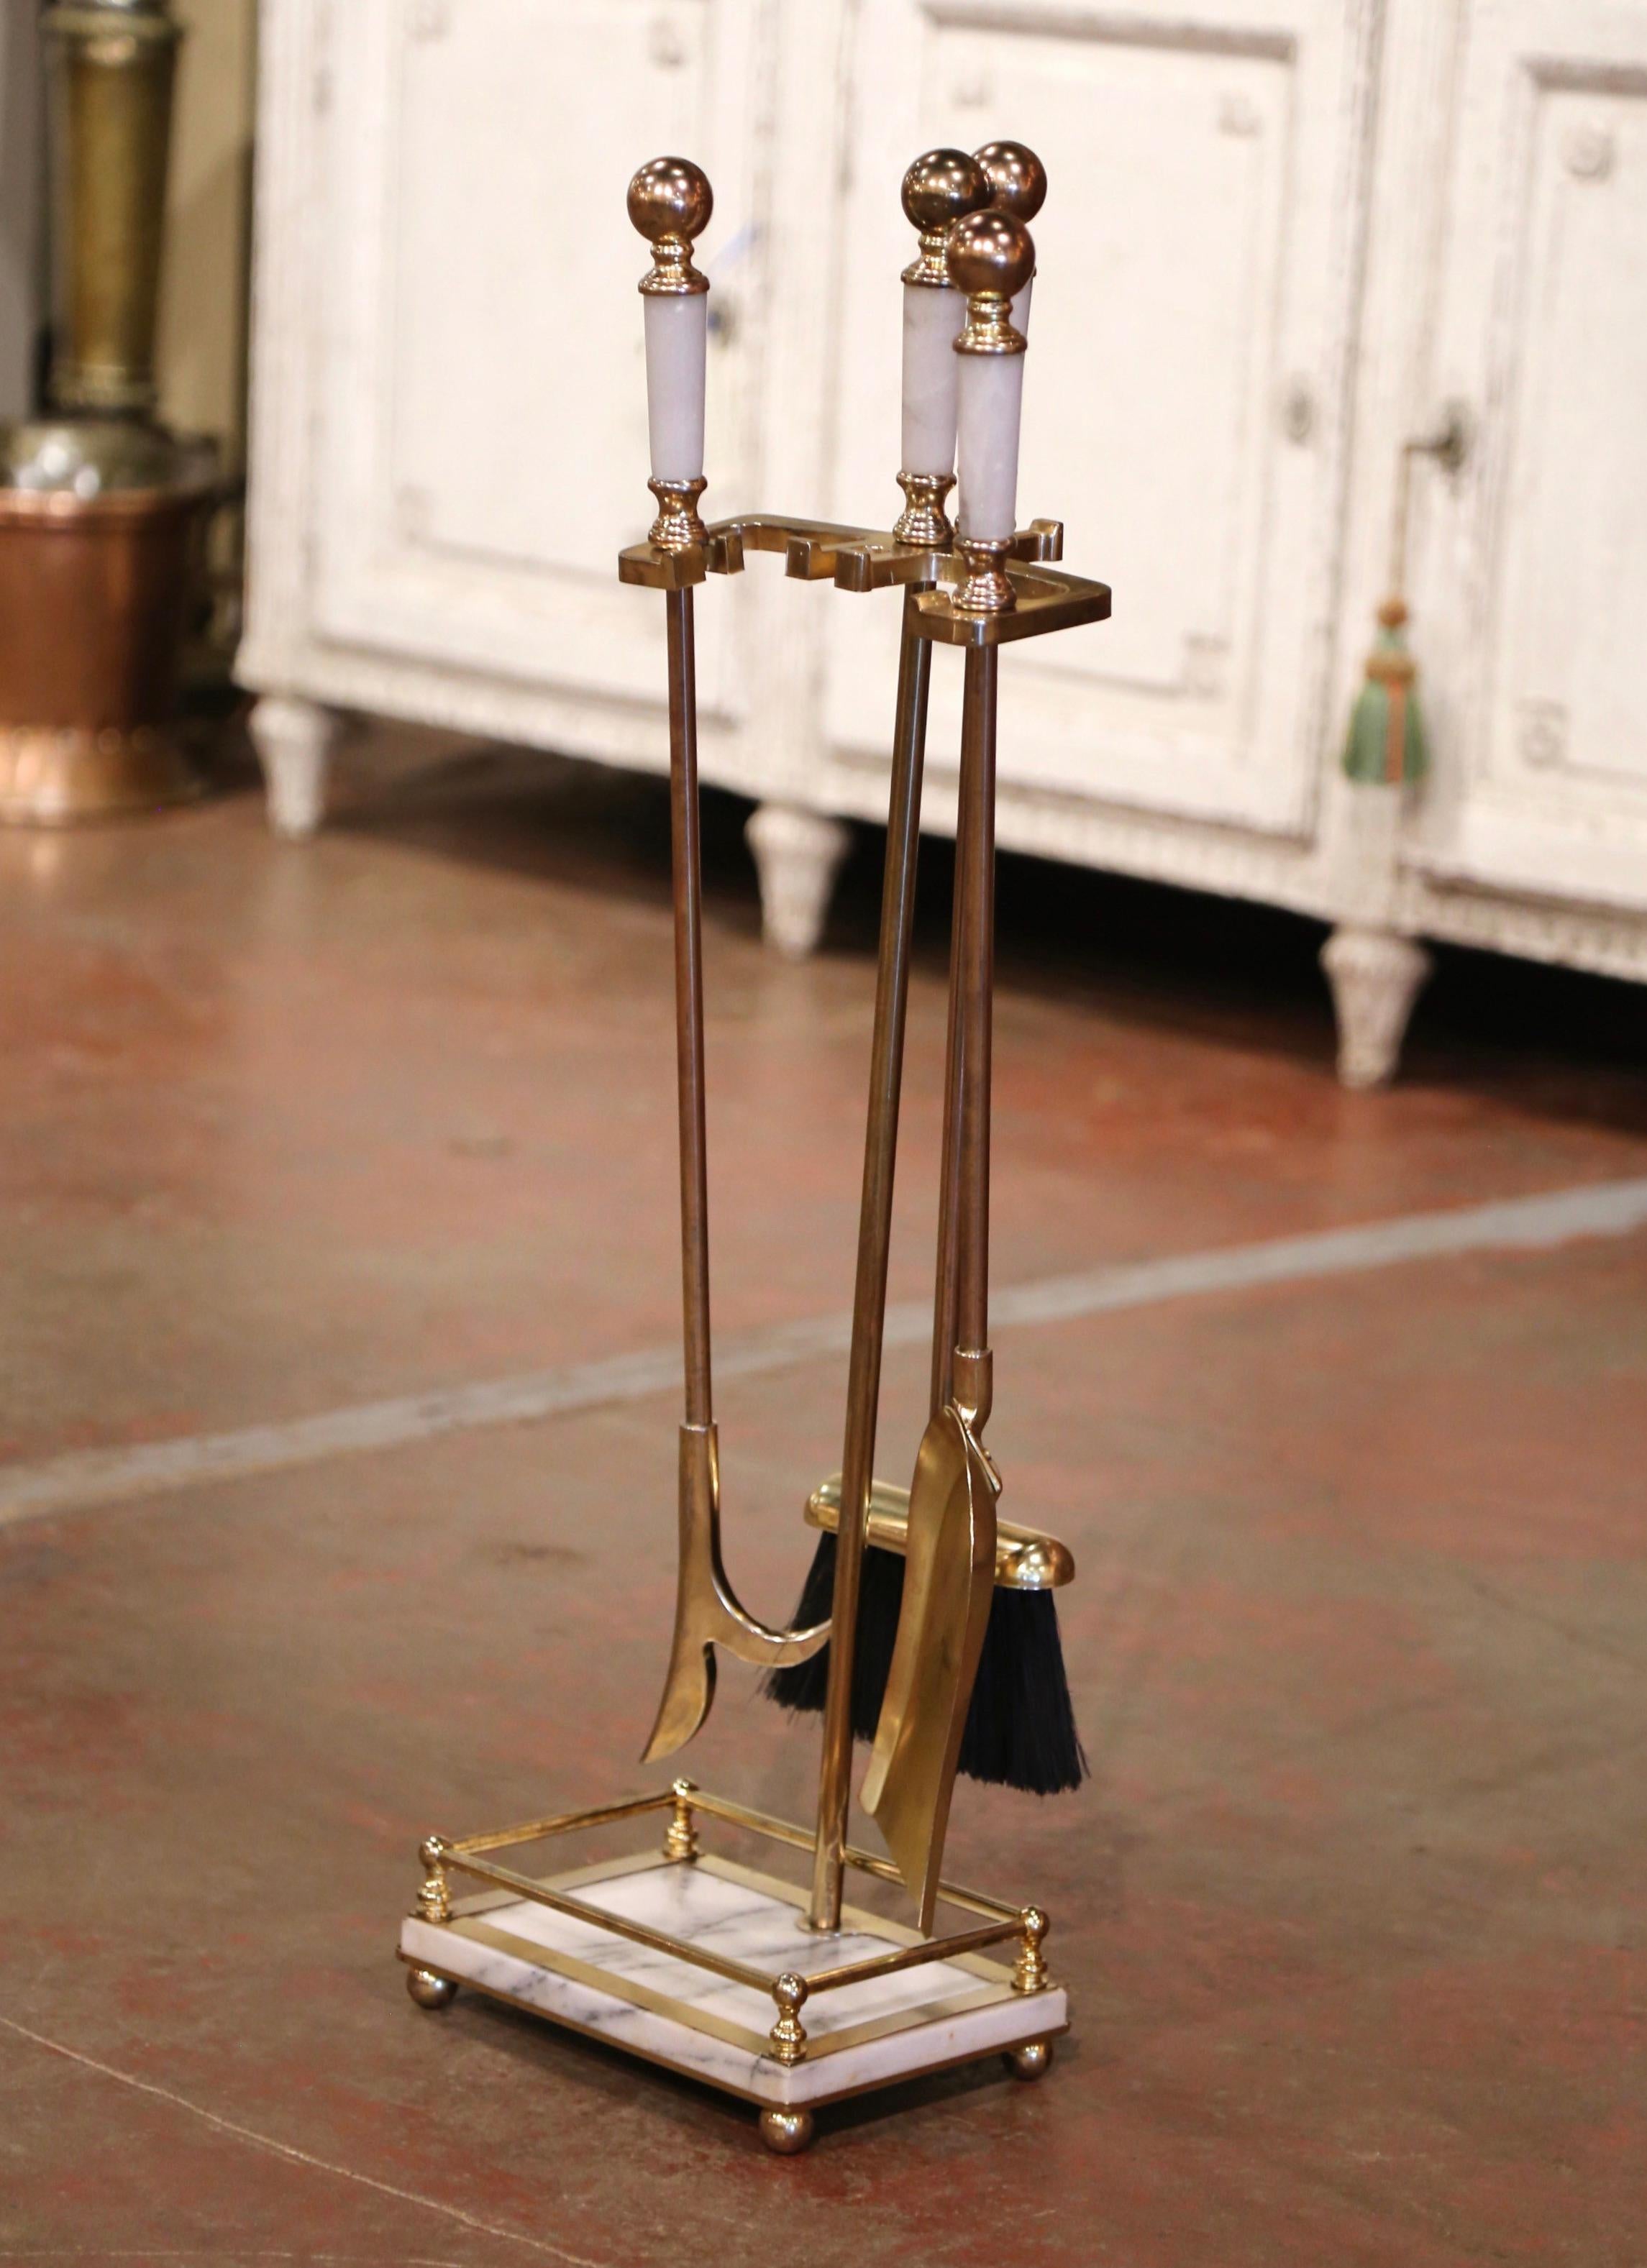 Place this elegant antique fireplace tool set next to your mantel. Crafted in France circa 1950, the brass Rococo 